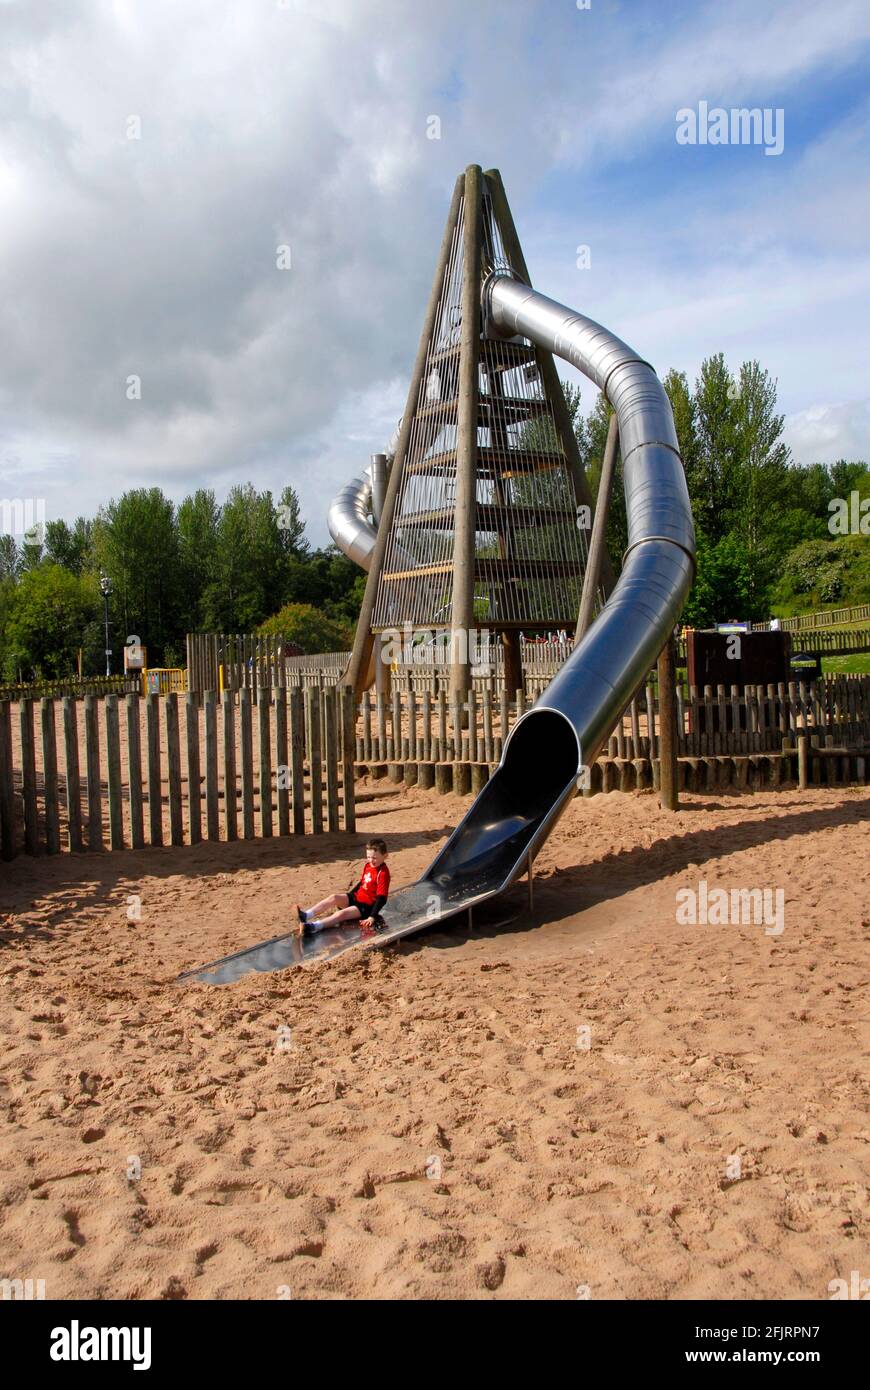 Tall four-sided structure with young boy in red emerging from curved enclosed tube acting as children's slide, Telford Town Park, Shropshire, England Stock Photo